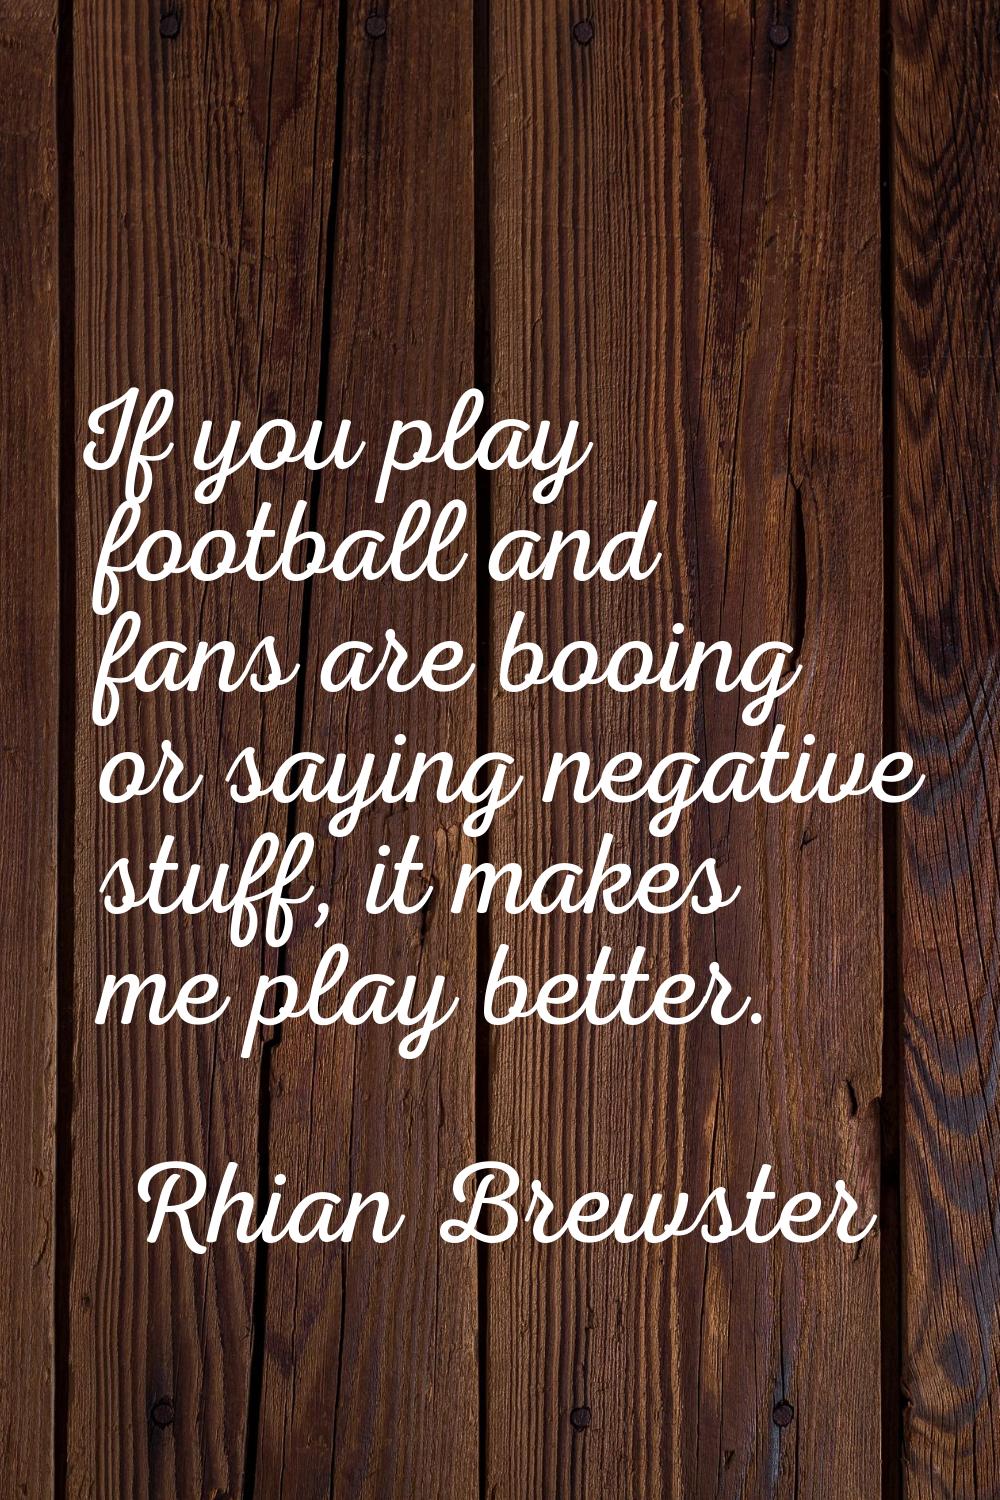 If you play football and fans are booing or saying negative stuff, it makes me play better.